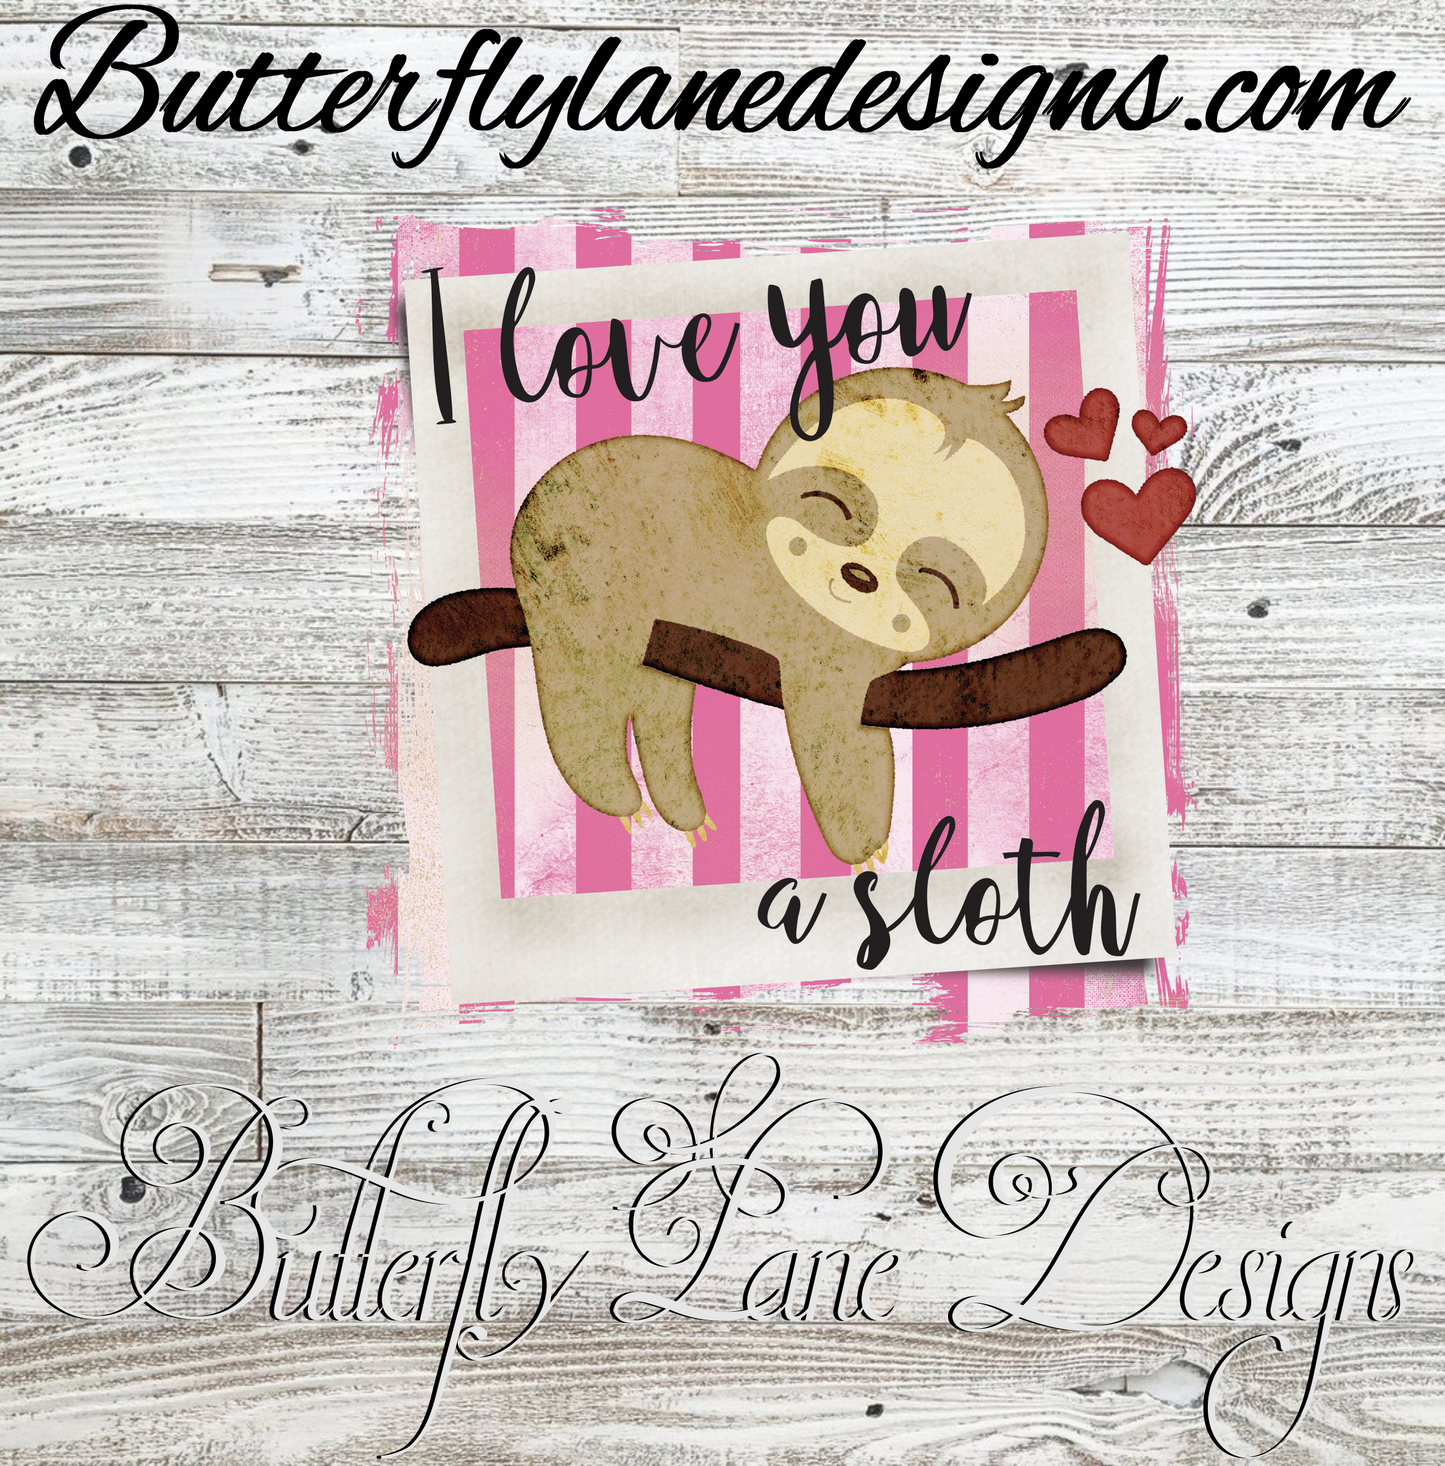 I love you a sloth-baby sloth-pink white stripped :: Clear Cast Decal